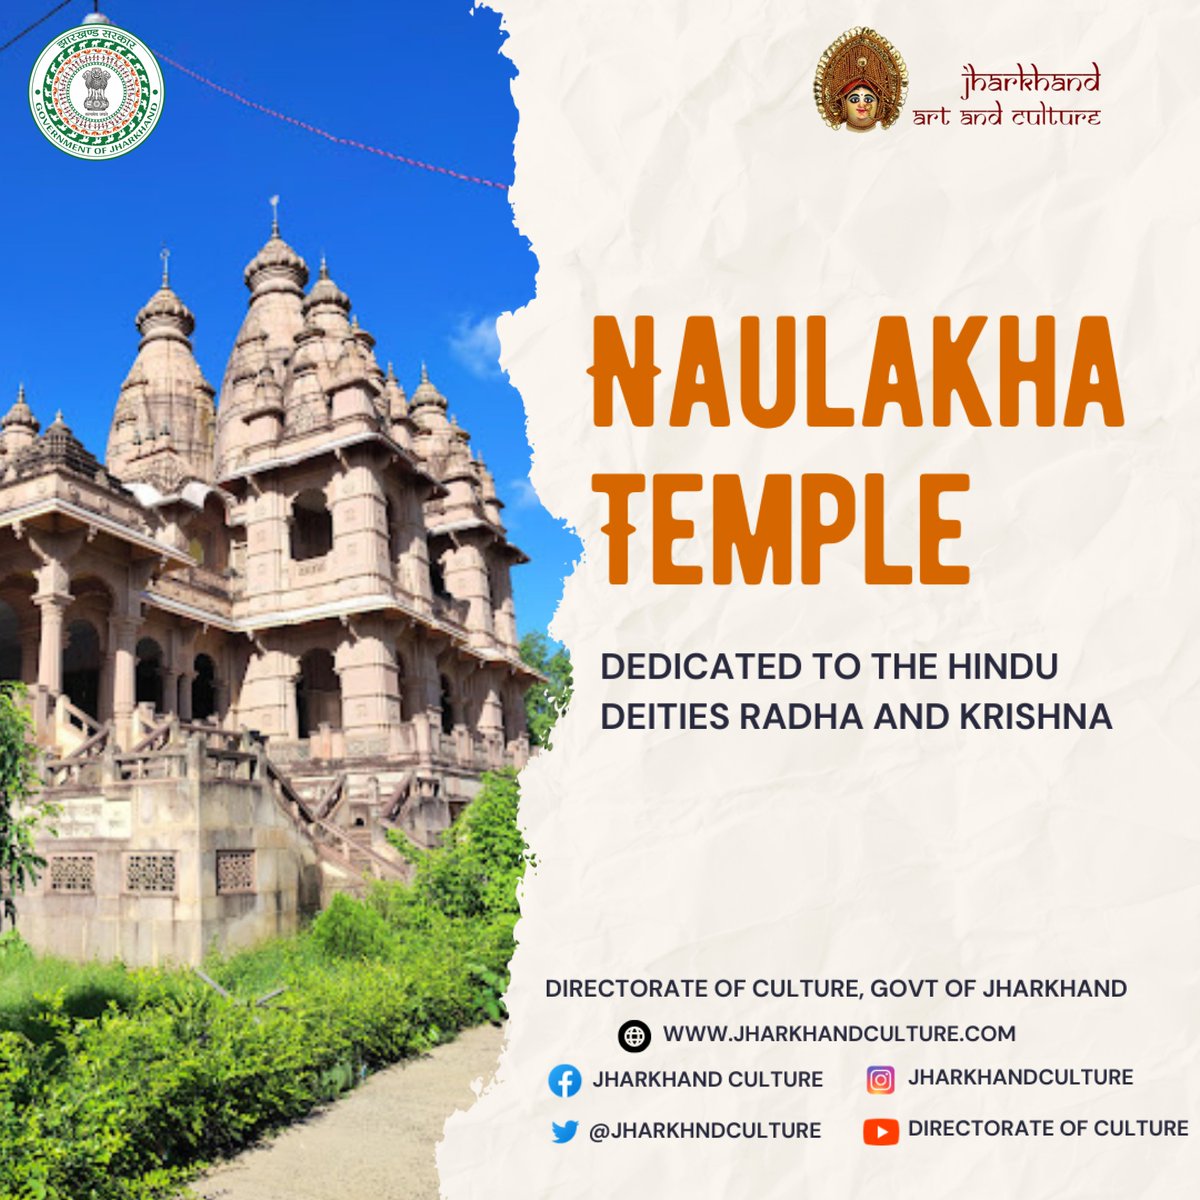 The Naulakha Temple is located in Deoghar, #Jharkhand. It is dedicated to the Hindu deities Radha and Krishna. The temple was built by Rani Charushila. The amount spent in construction of the temple was about Rupees Nine lakhs (9 lakhs). Hence it became known as Naulakha Temple.